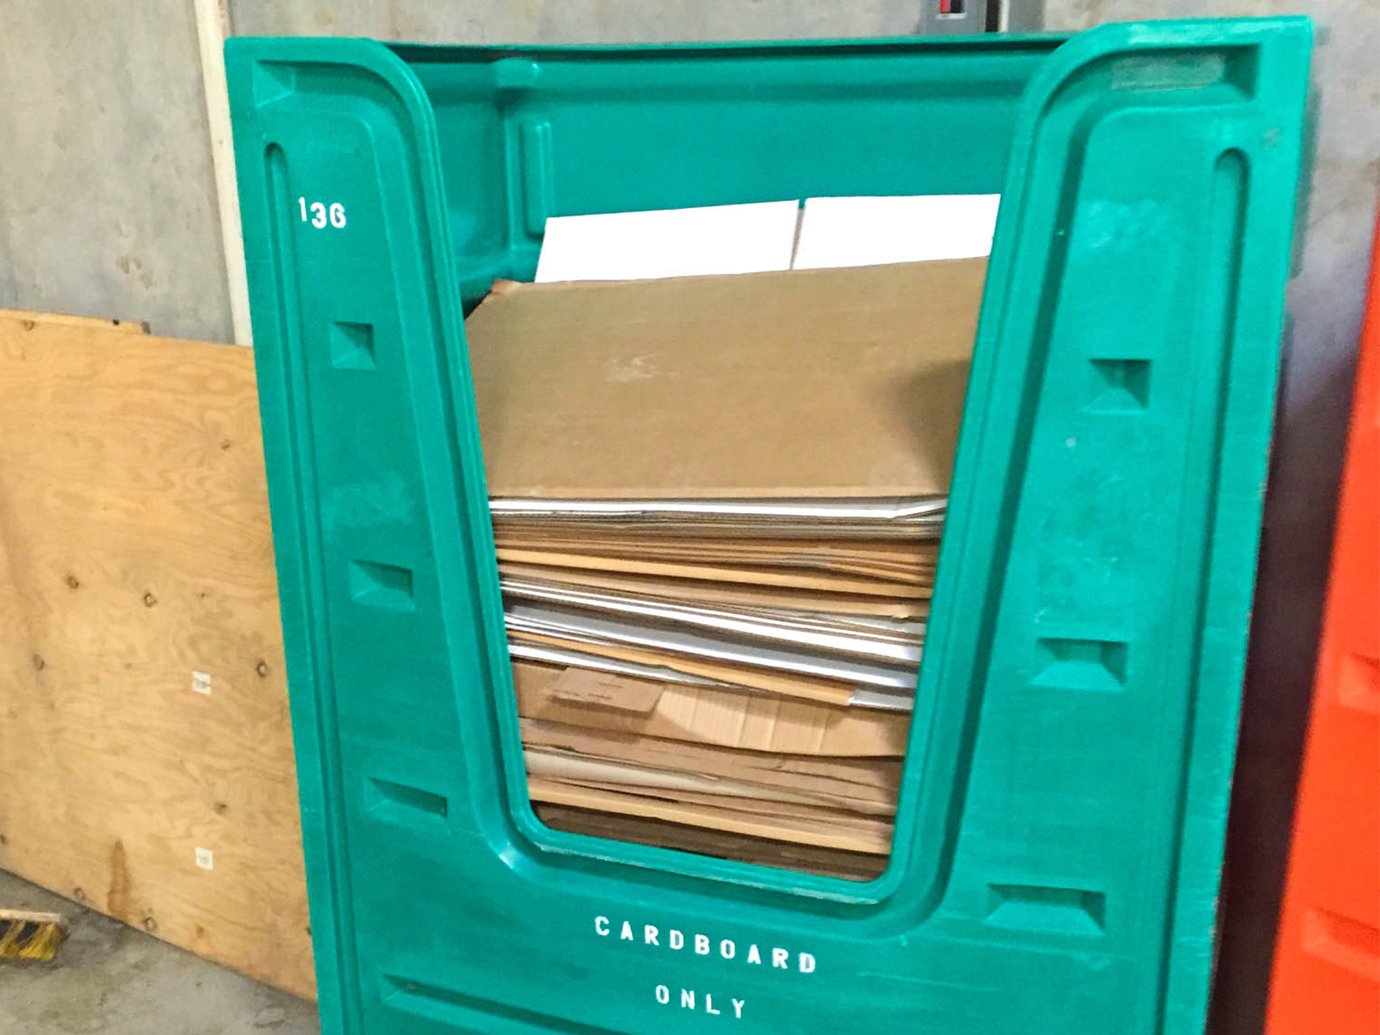 Green recycling crate full of stacked cardboard